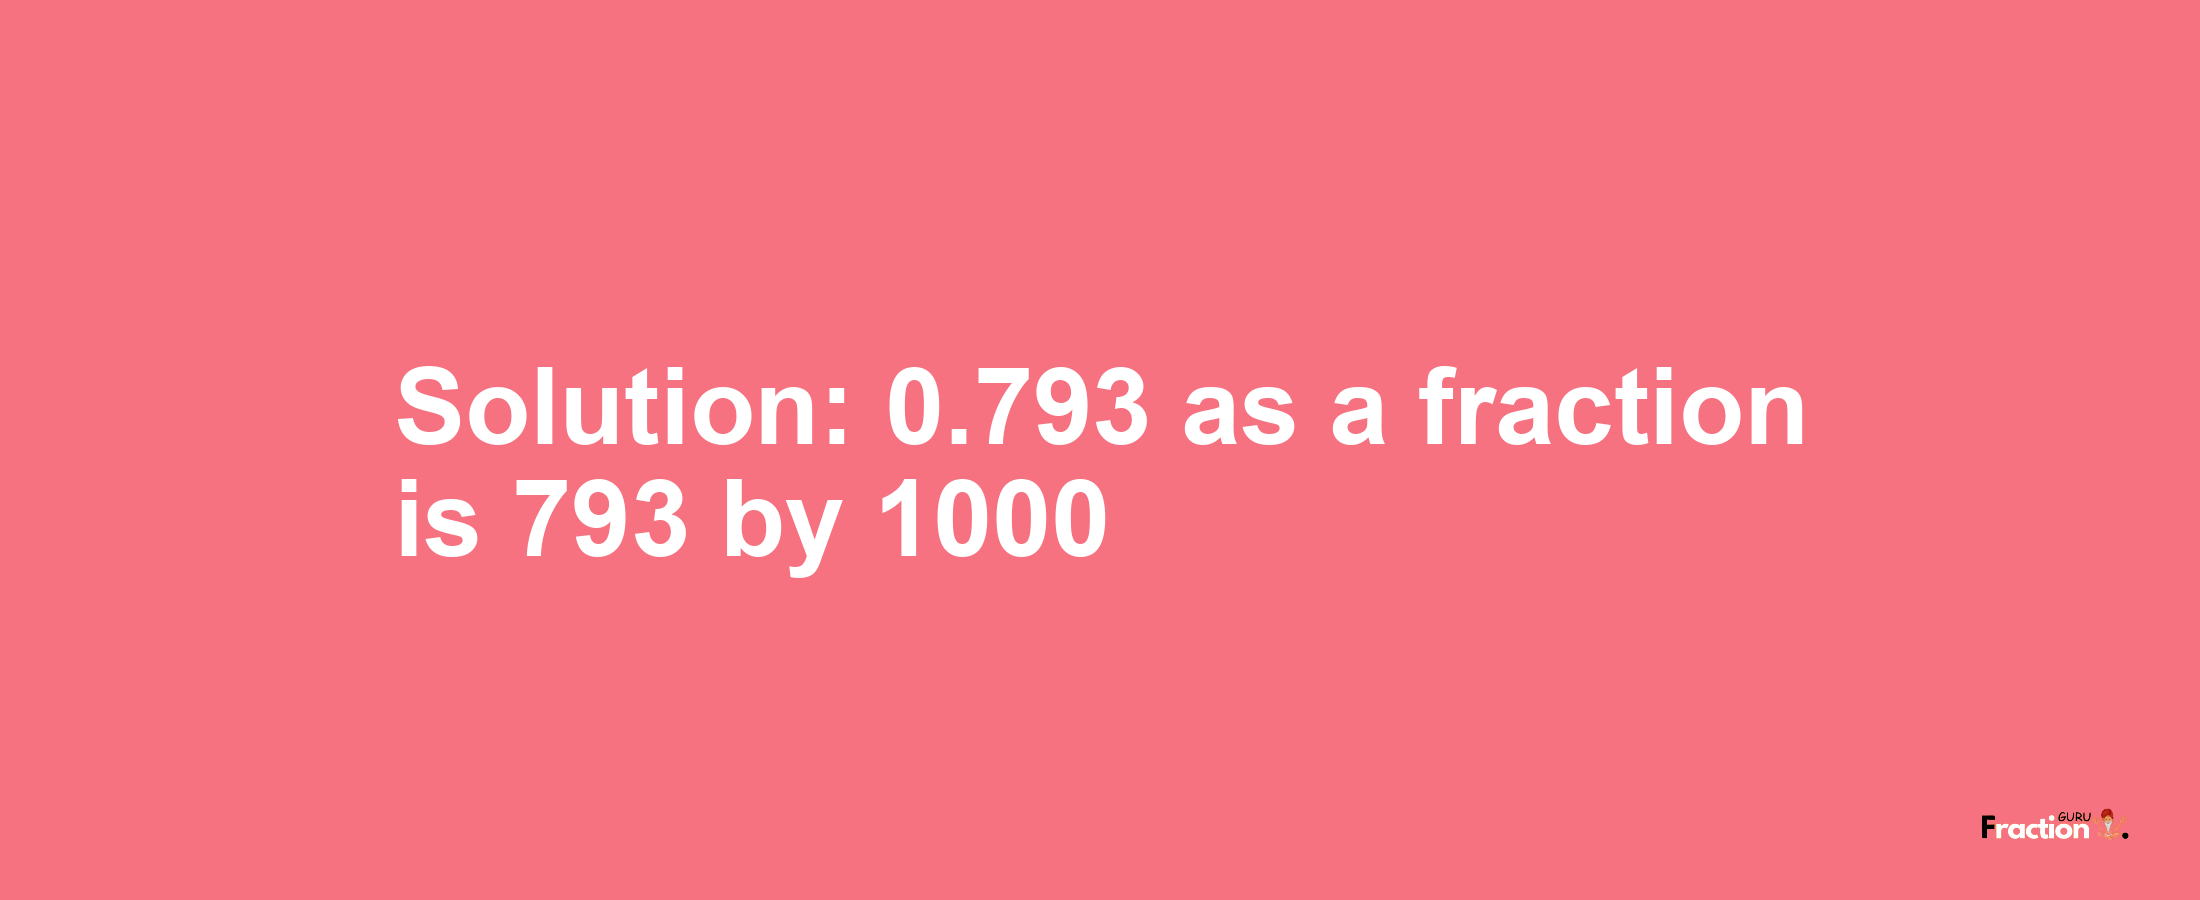 Solution:0.793 as a fraction is 793/1000